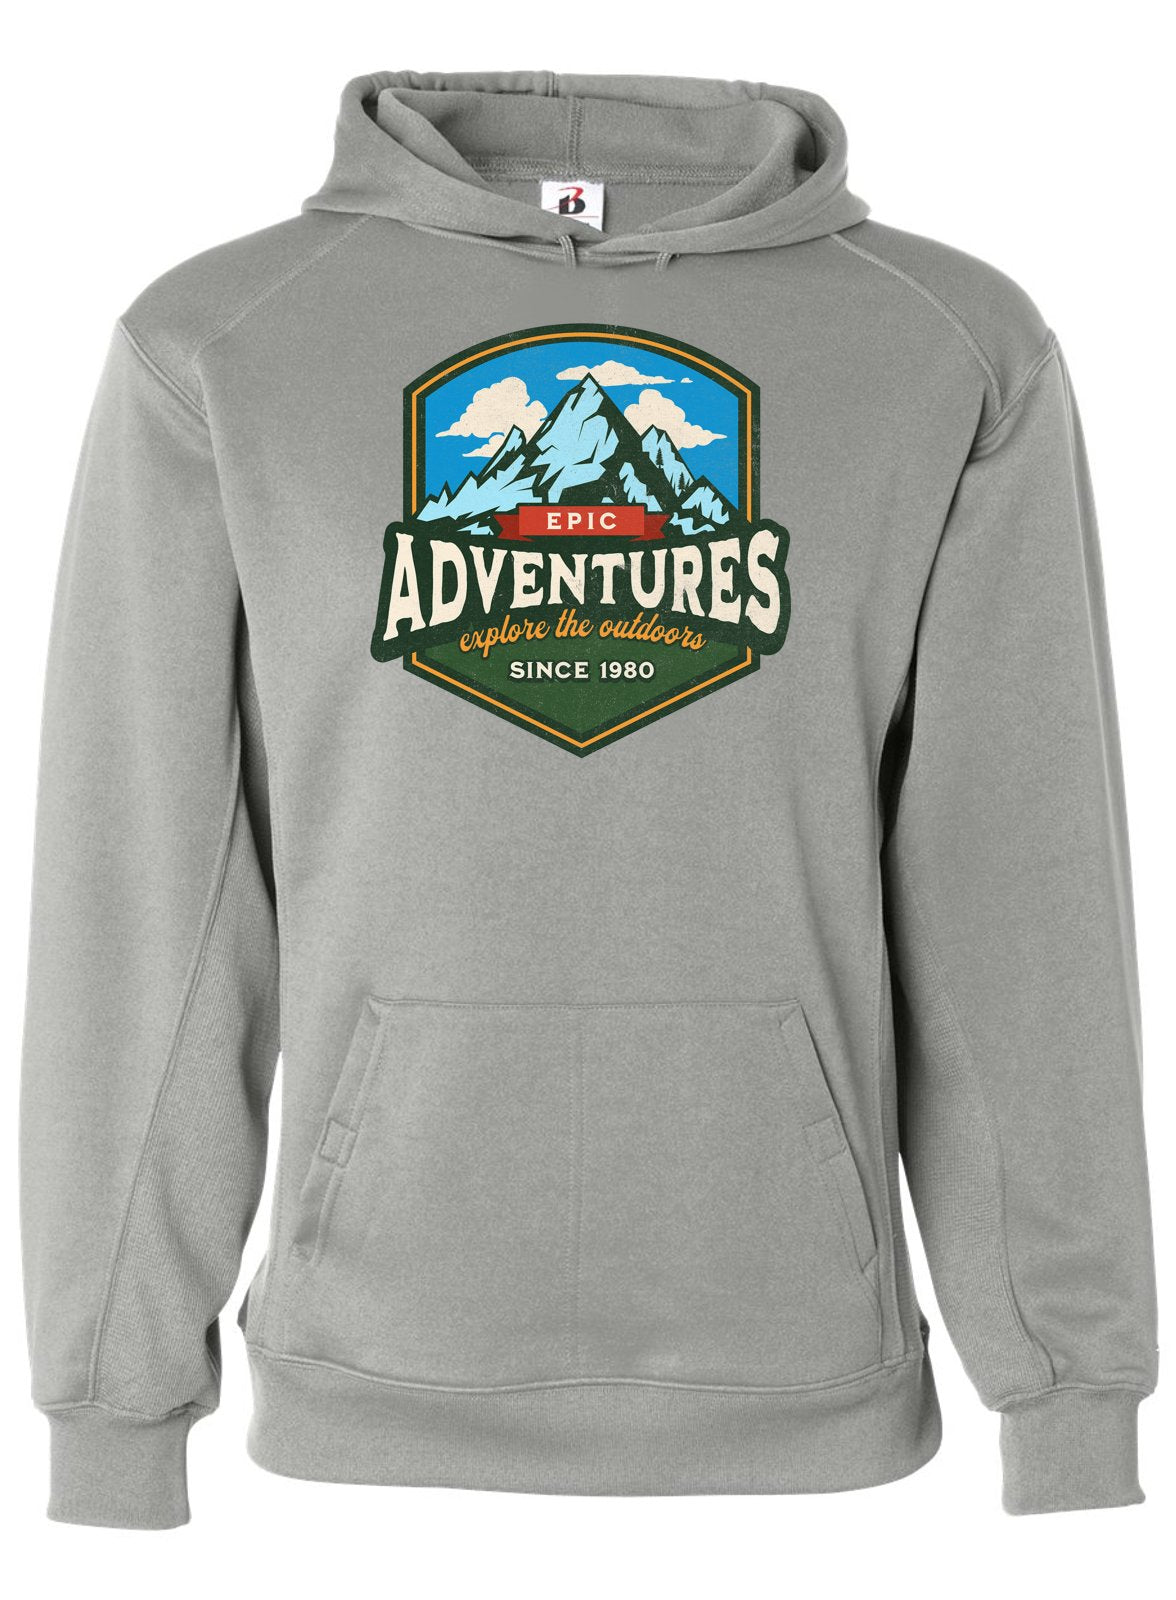 Epic Adventures Explore the outdoors - Silver -